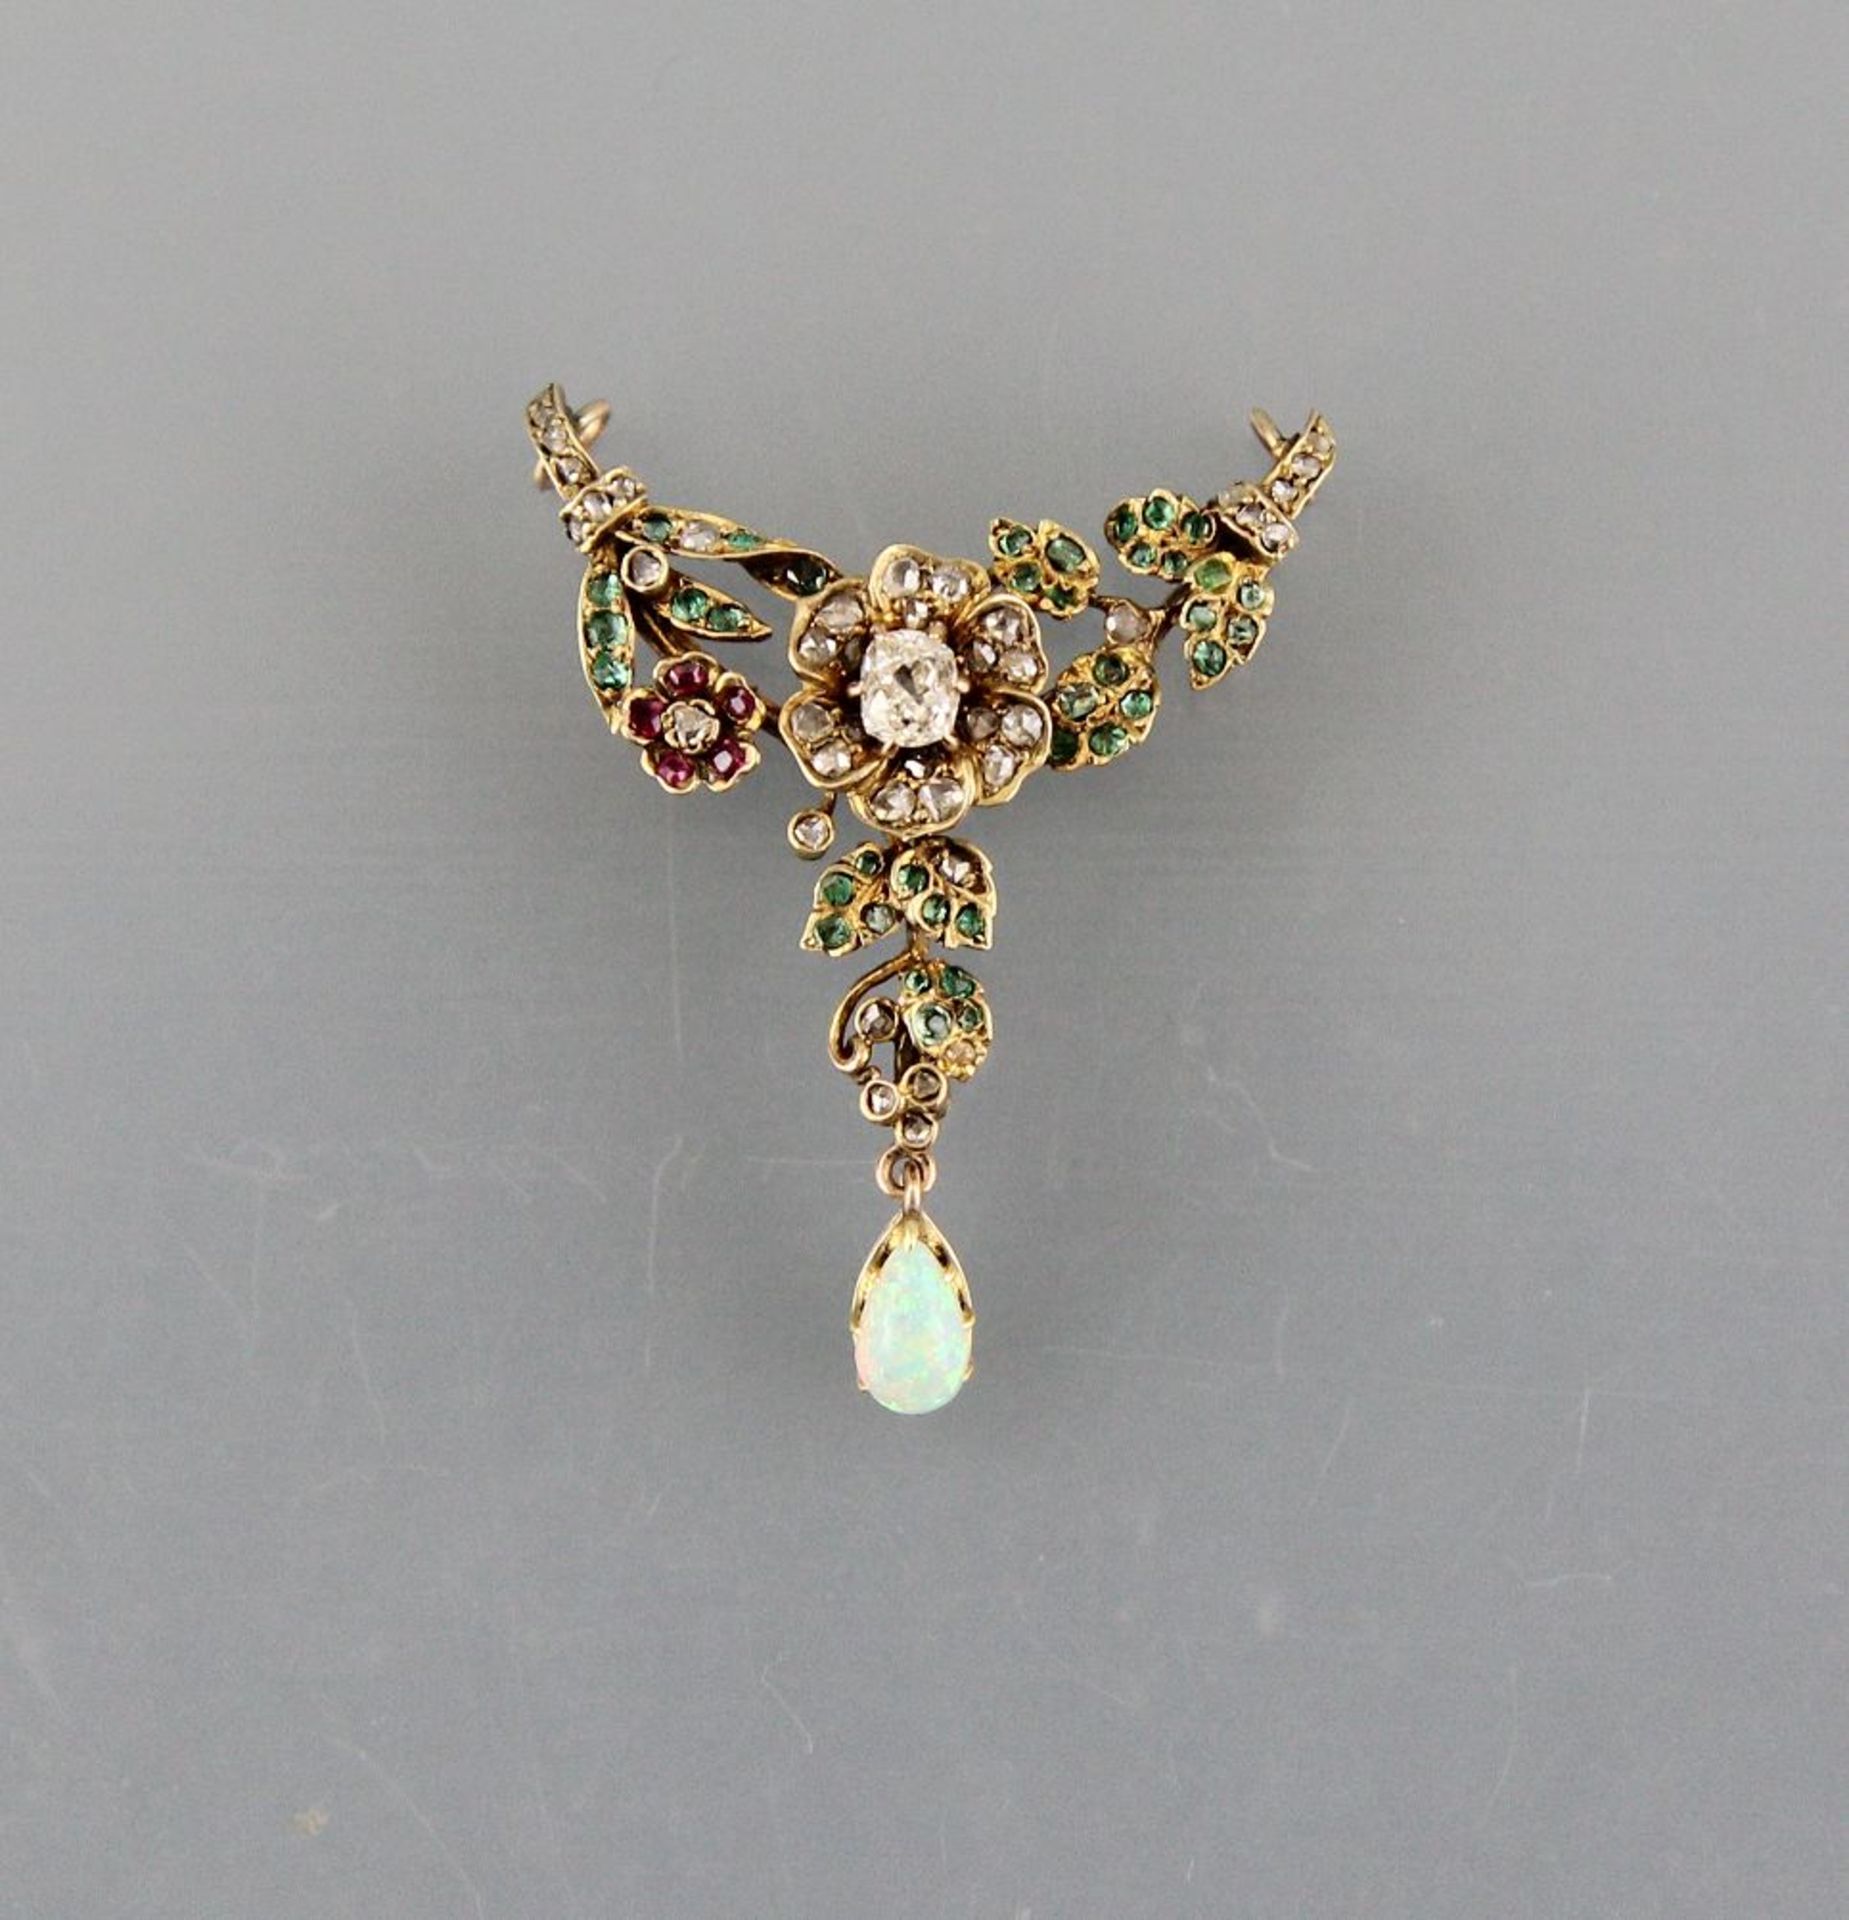 Pendant 14ct. yellow gold with diamond roses, rubies and emeralds, attached small opal, 30 x 38